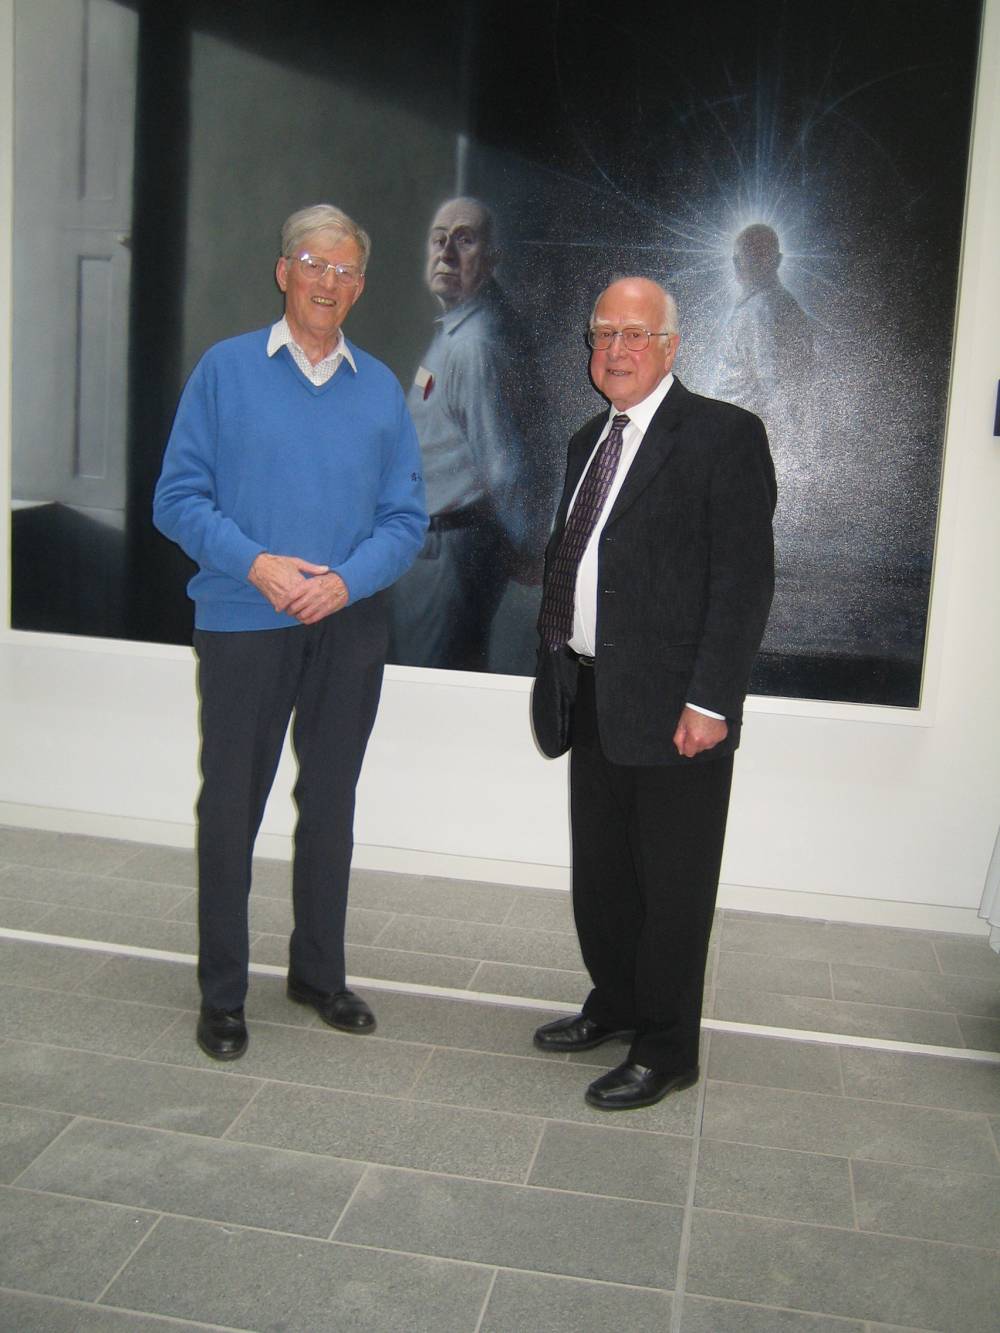 This shows Peter Higgs meeting Ian Chuter, a fellow undergraduate at King&#039;s College London. Ian was in the Informatics Forum by chance on the same day. These photographs are courtesy of Ian Chuter.